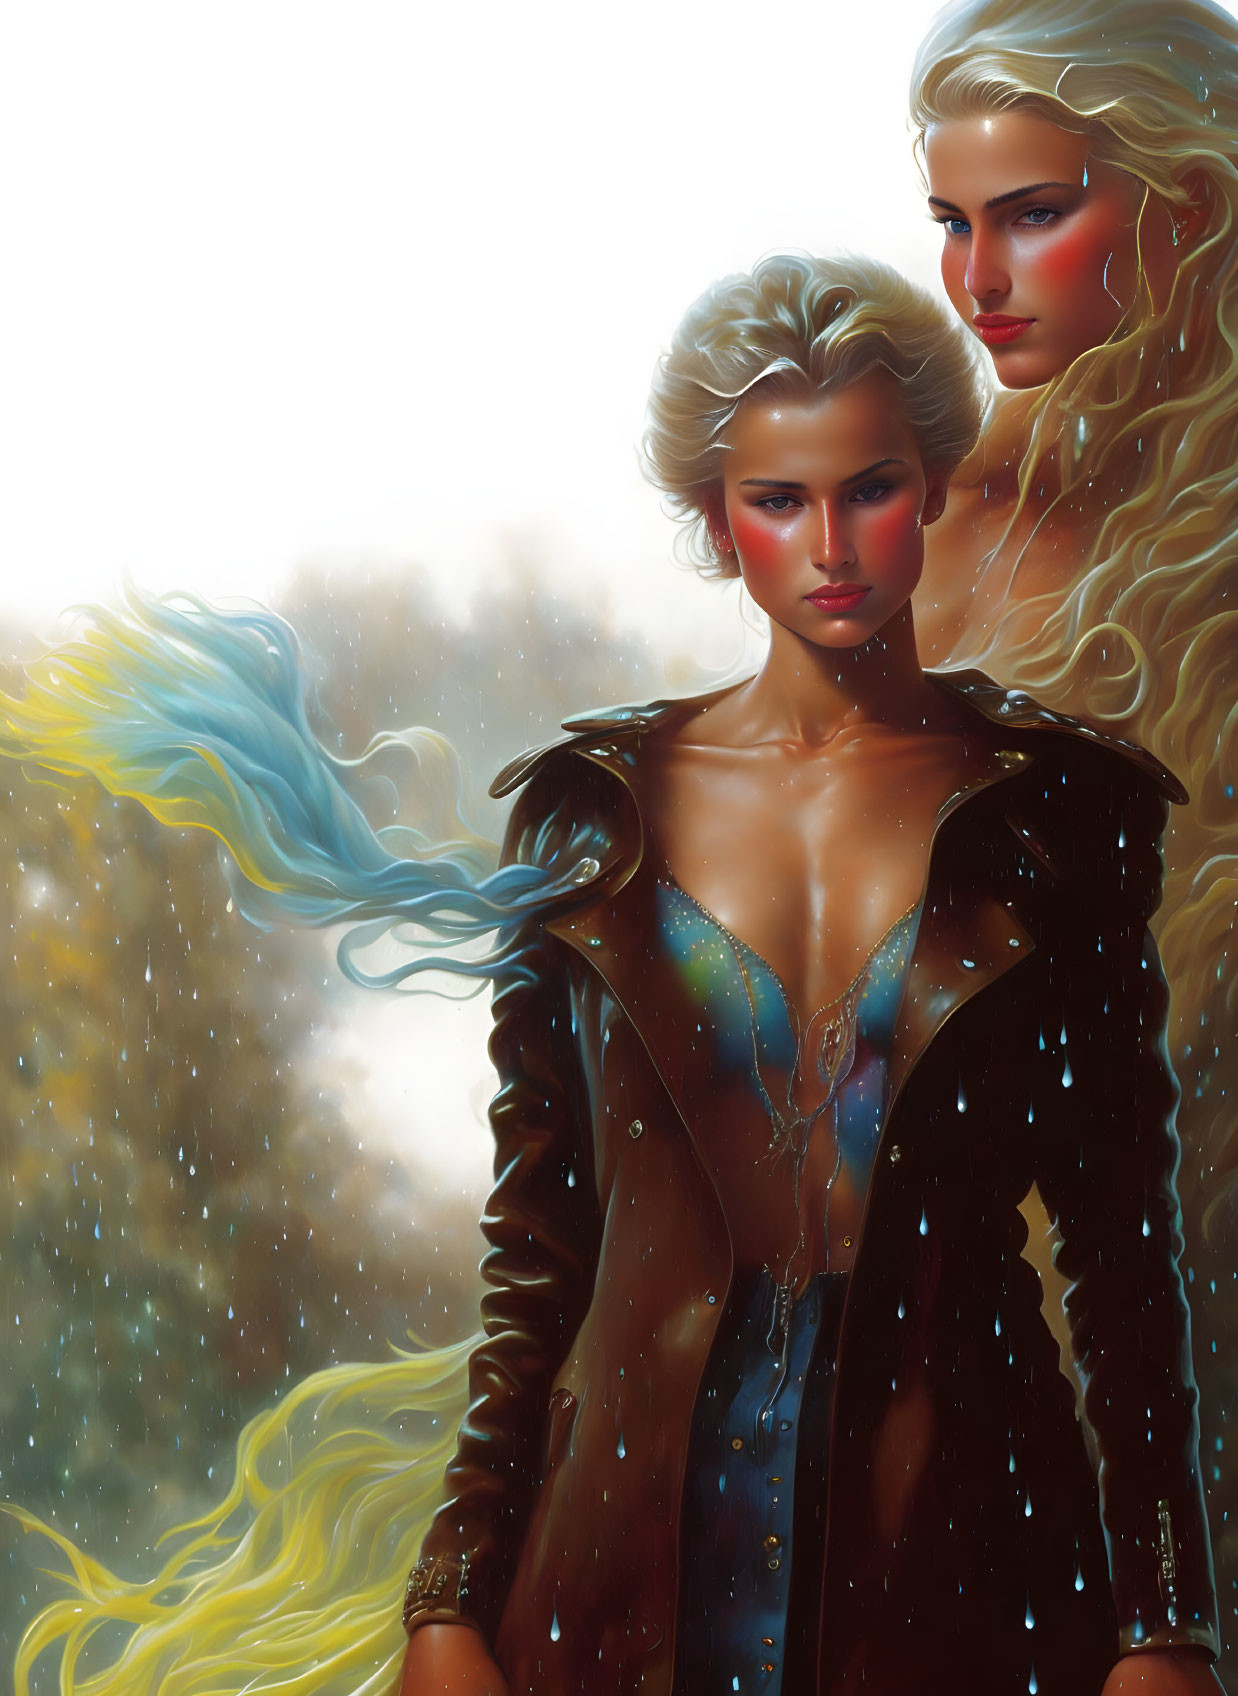 Ethereal women with blond hair and blue wisps on soft backdrop